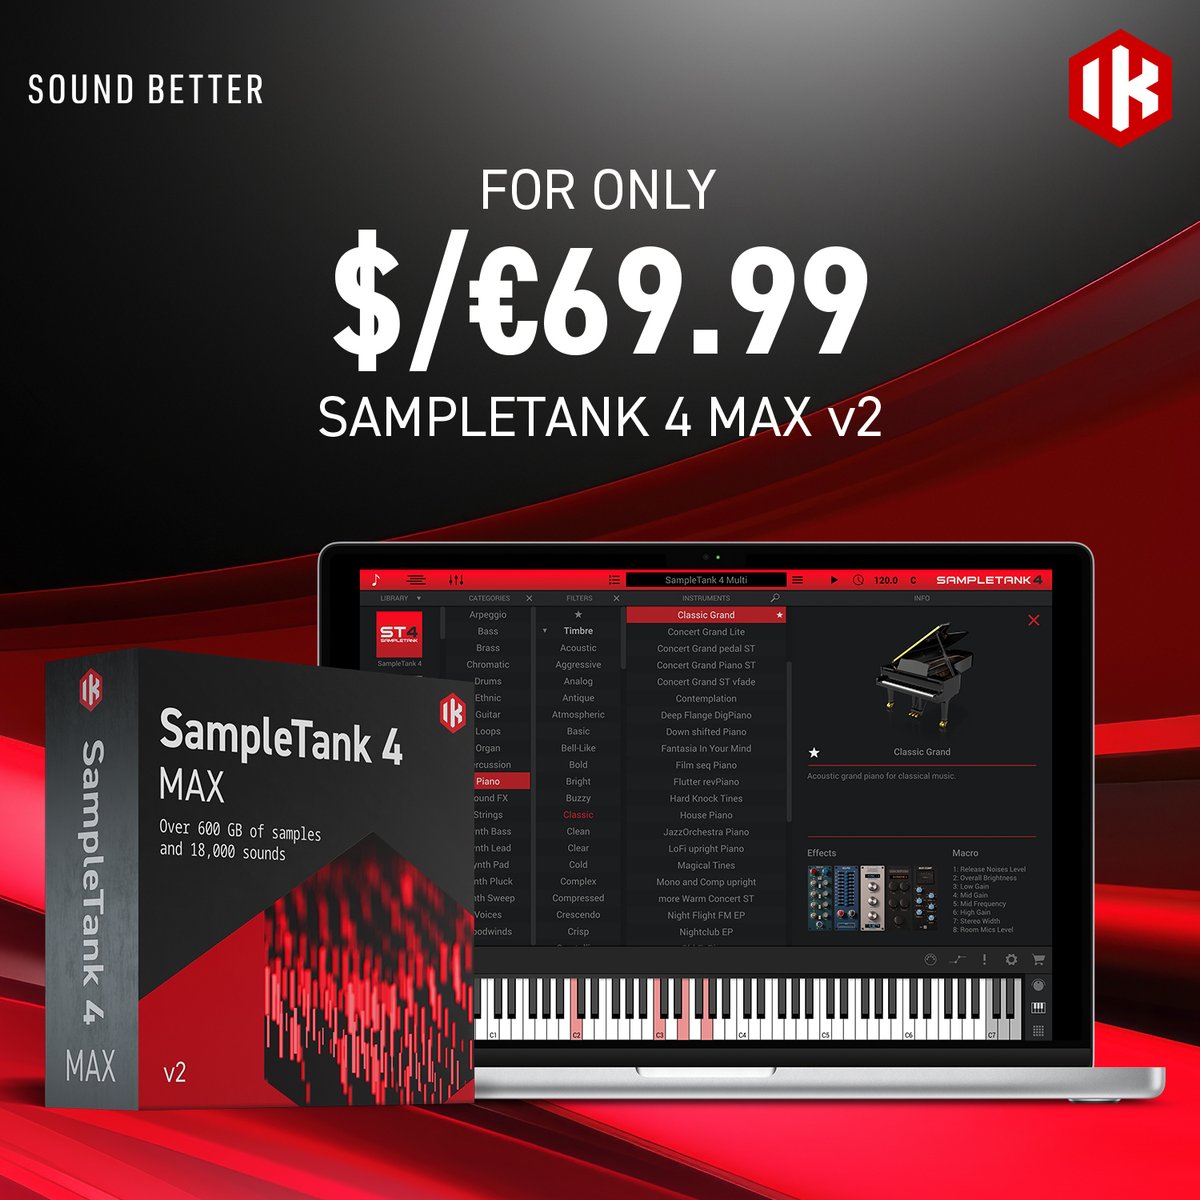 What might usually take dozens of plug-ins can be accomplished right inside SampleTank 4 MAX v2. Improve your workflow for 77% off for a limited time! bit.ly/sampletankmaxs…